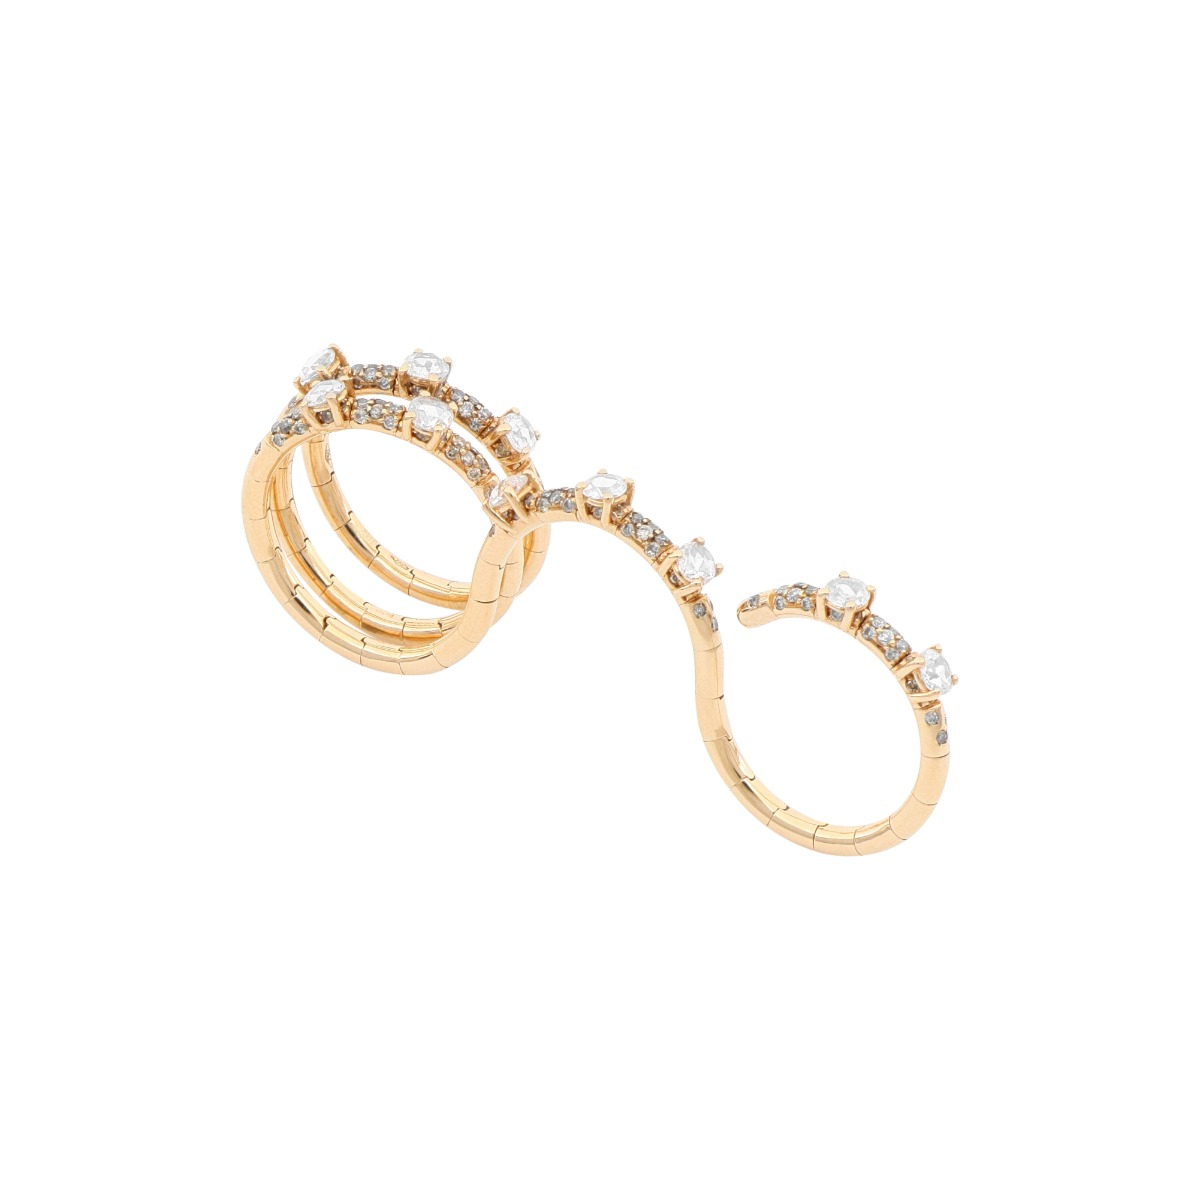 3 in 1 Gold Ring with Diamonds